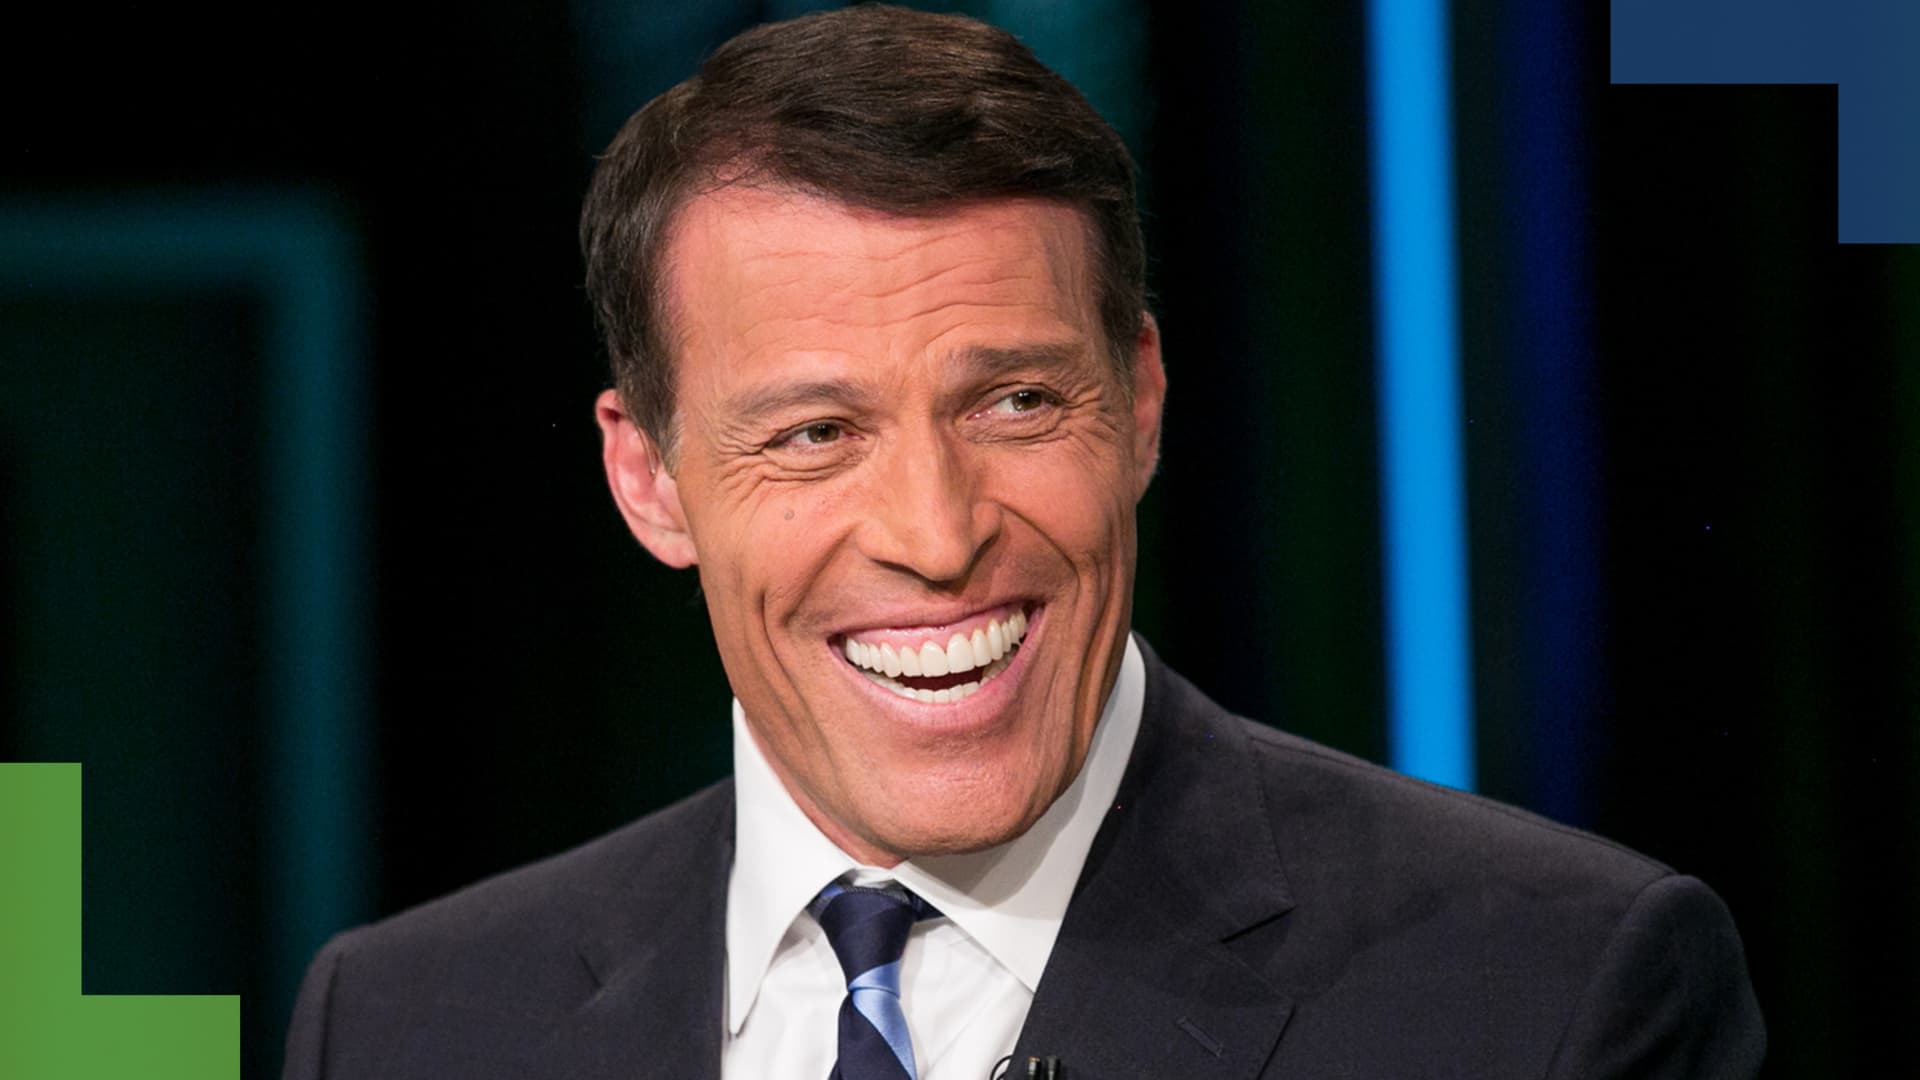 Tony Robbins says this is the secret to spark creative genius at work